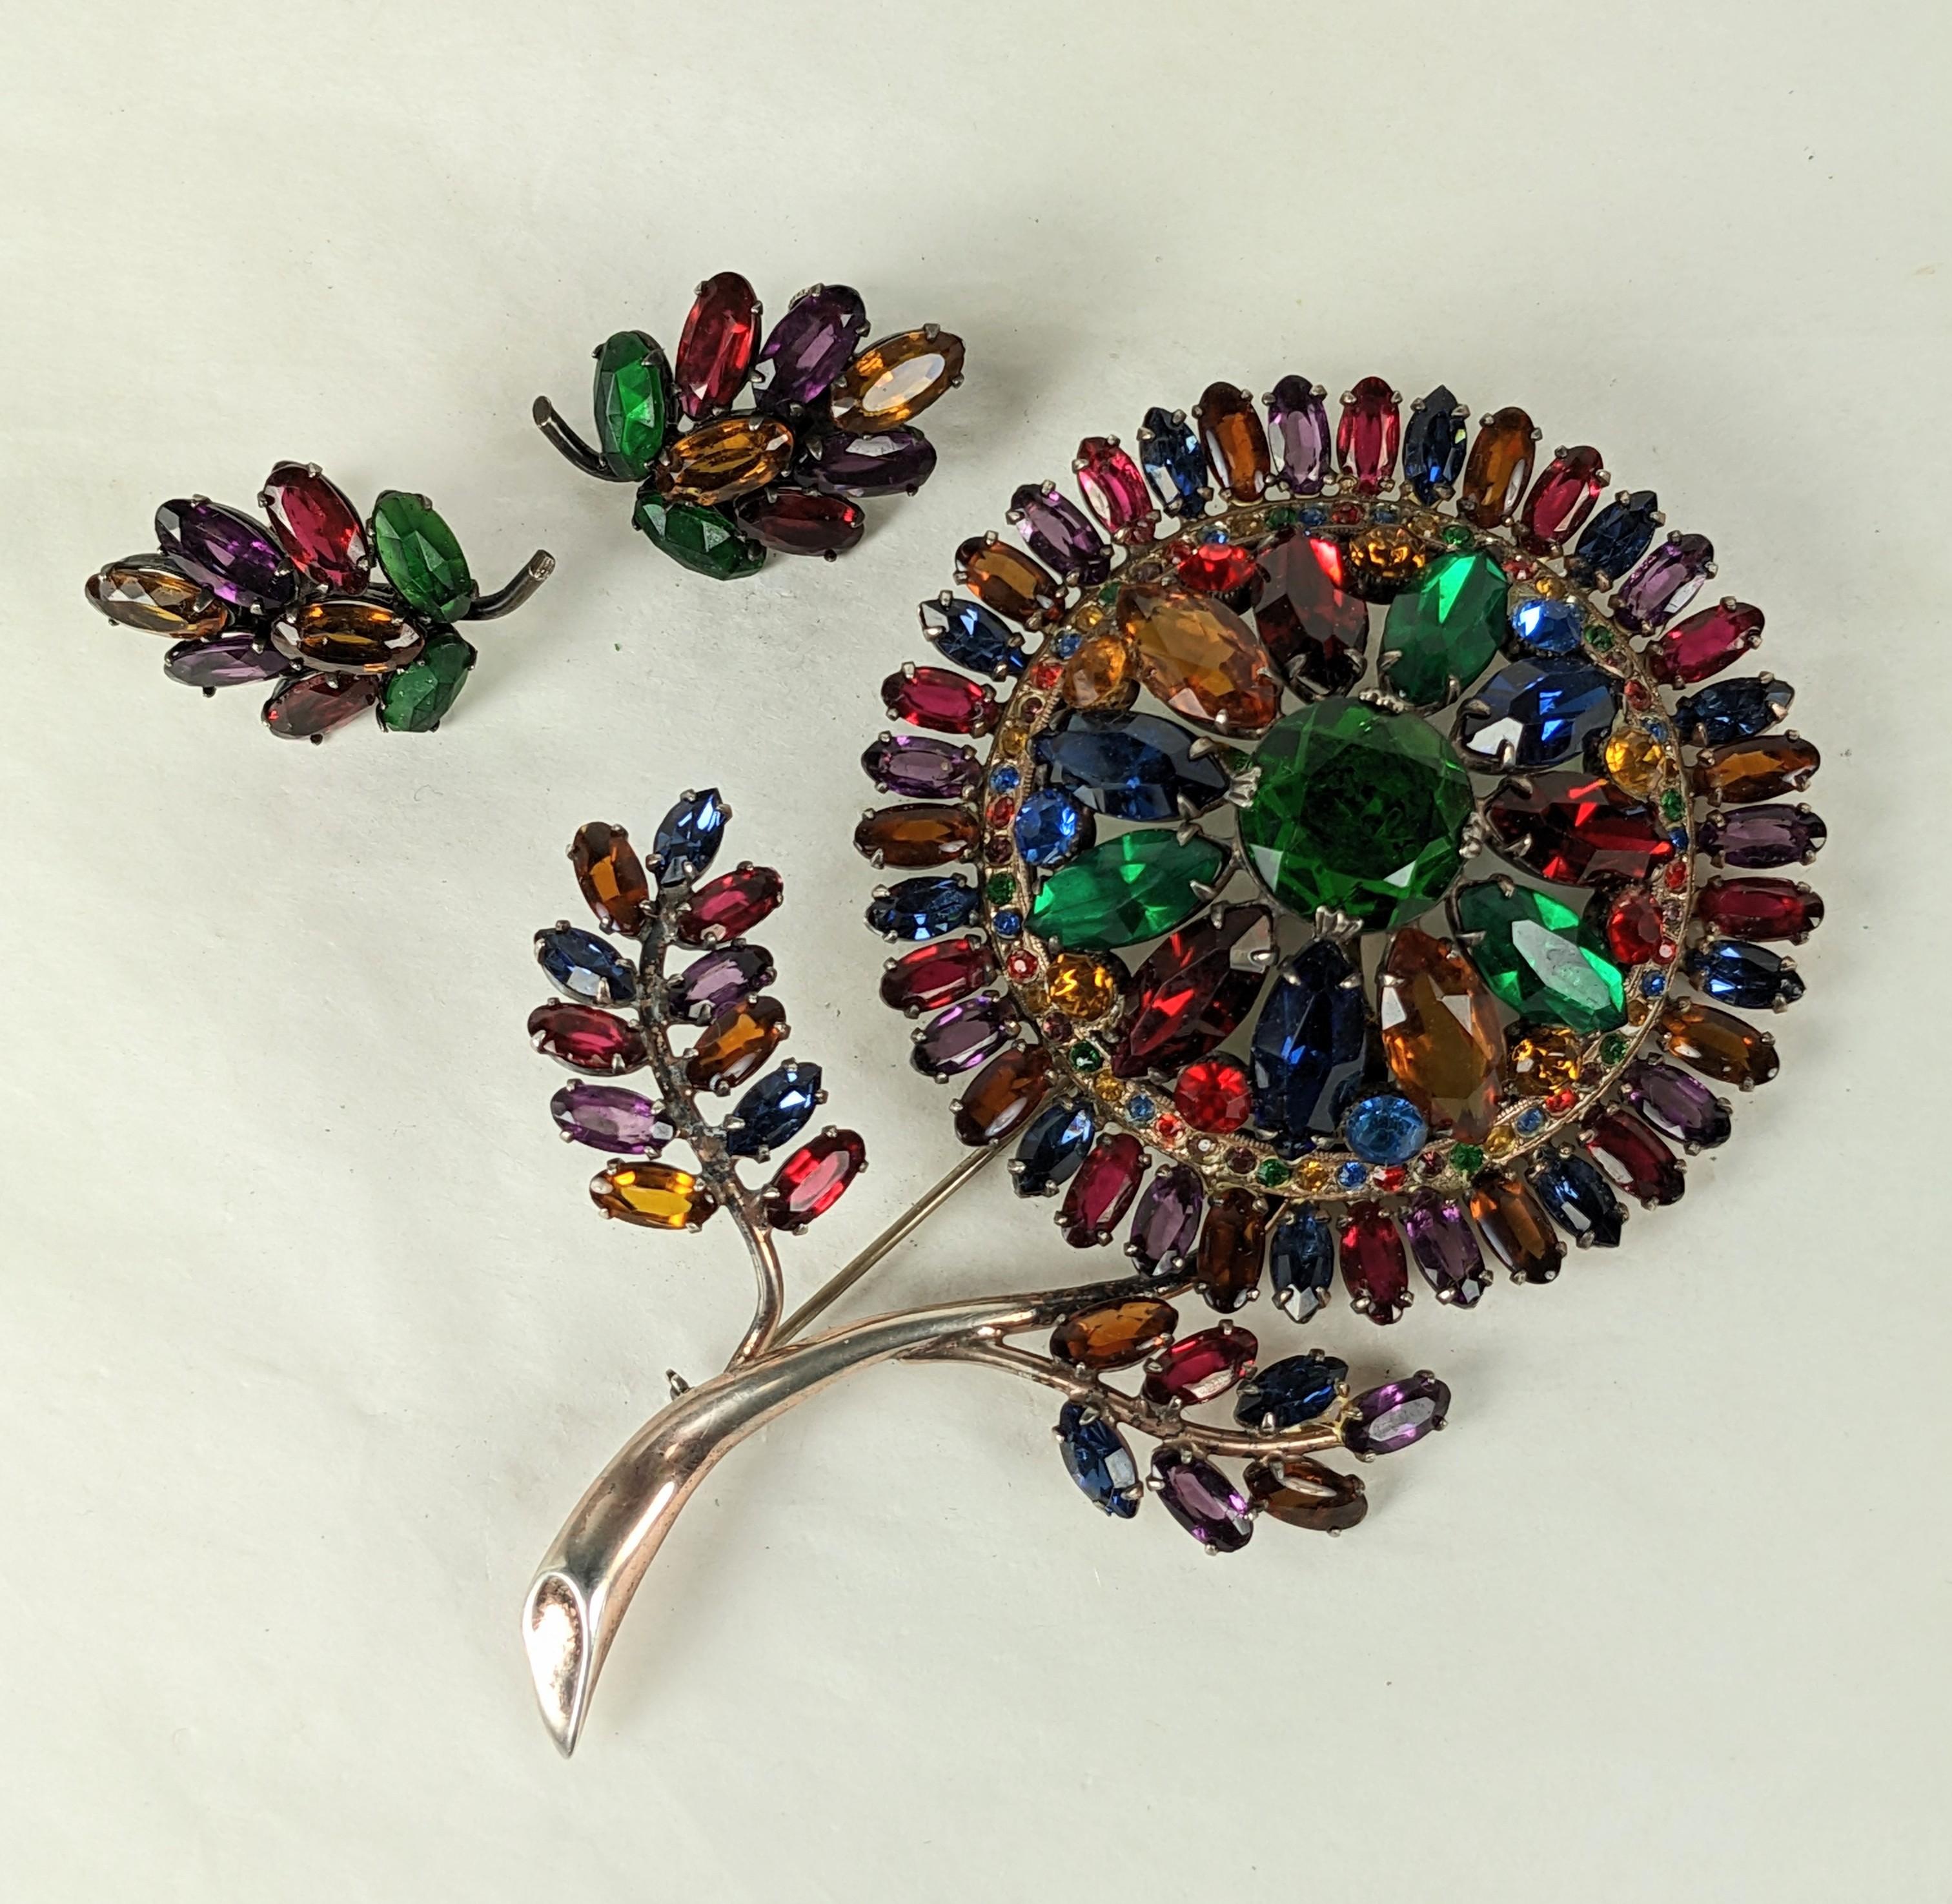 Exceptional Art Deco Jeweled Flower Set from the 1930's. Incredible scale and design in a multitude of colors set in sterling silver. Matching screw back earrings. 
1930's USA. Brooch 4.25